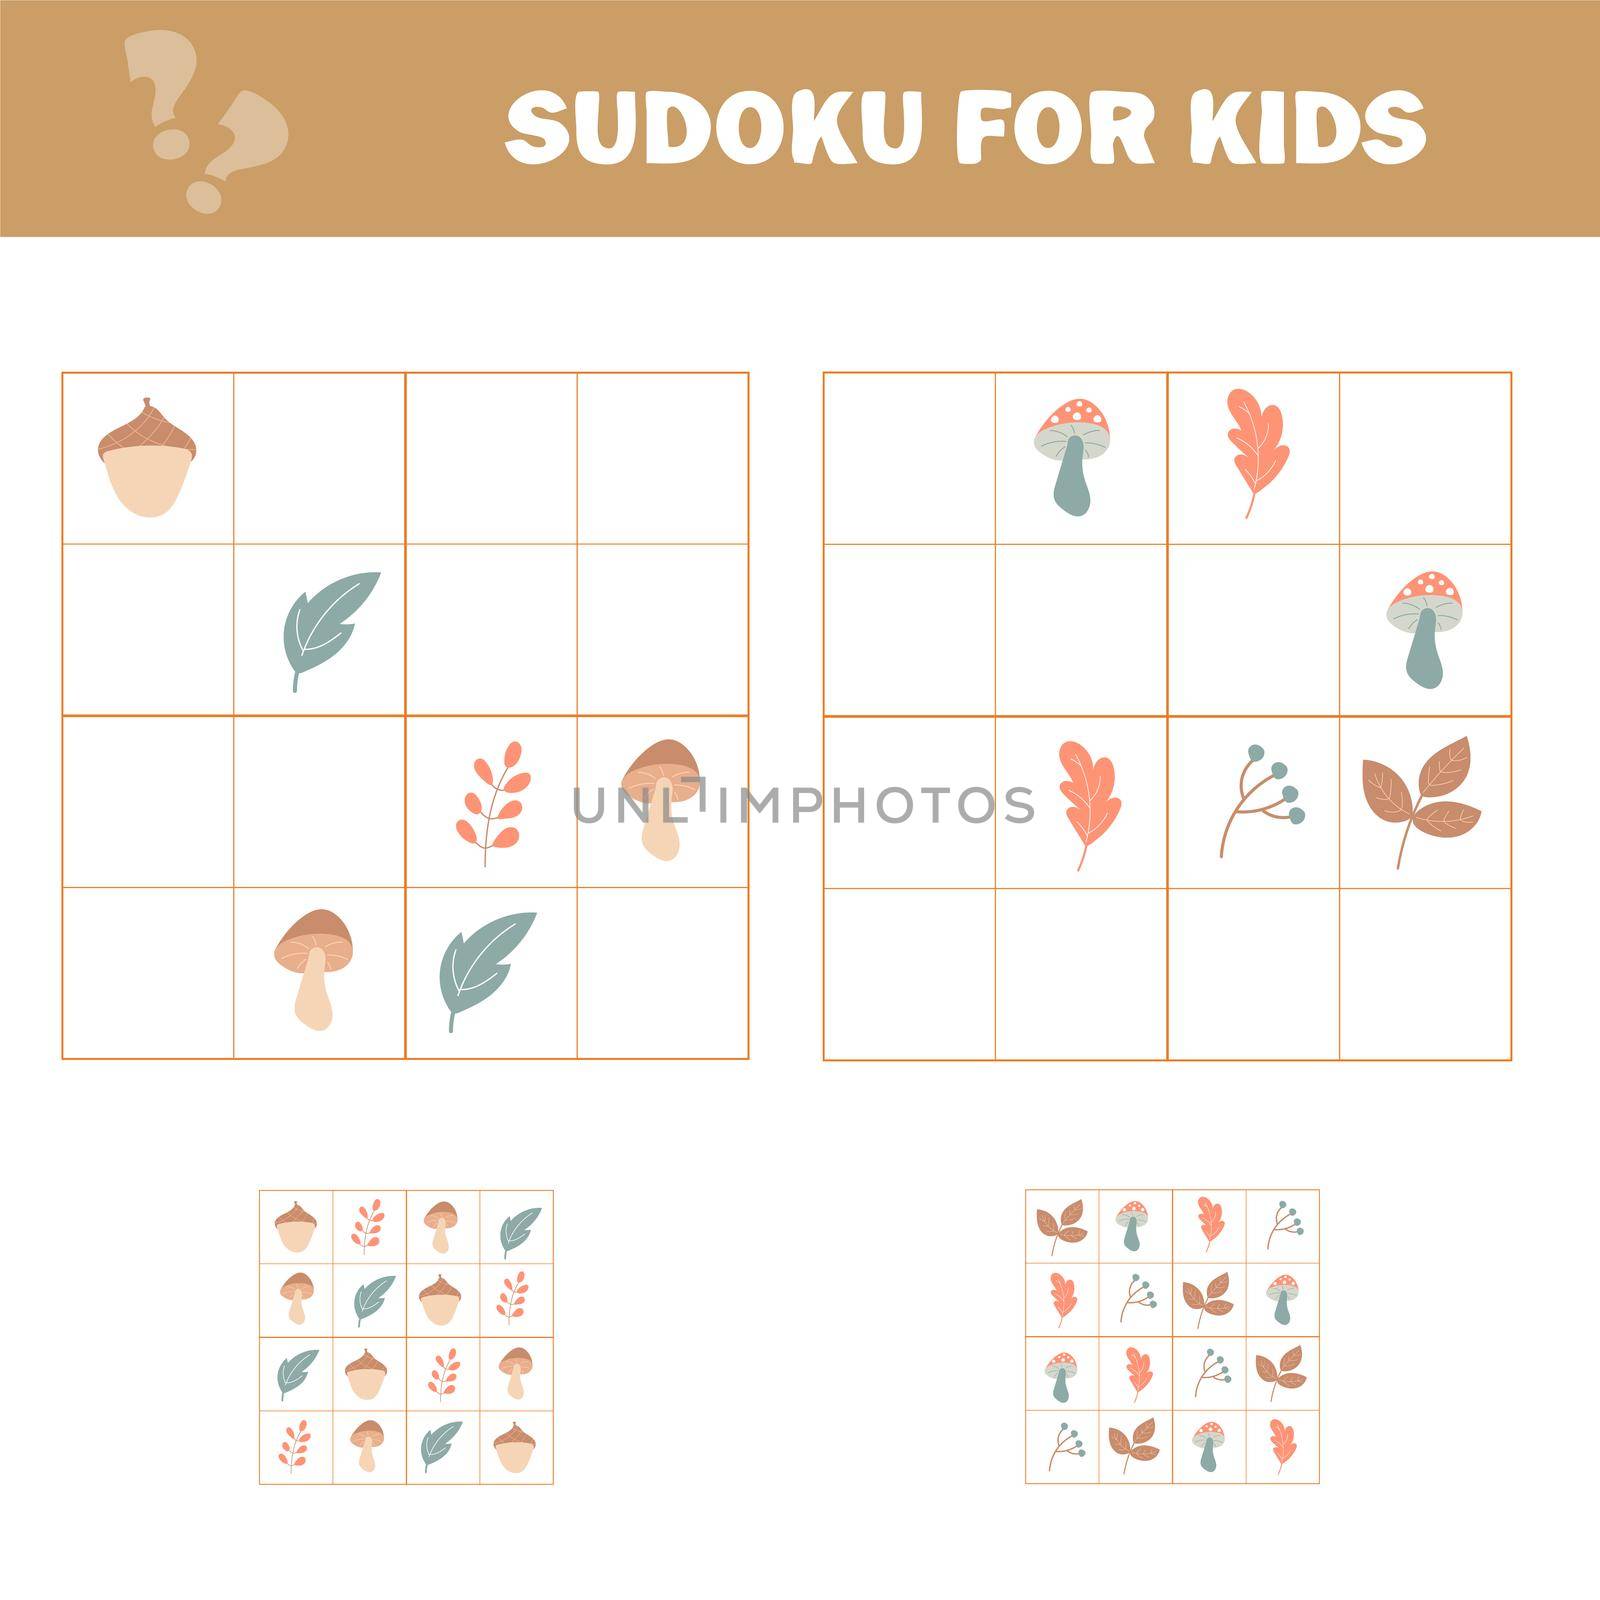 Set of tasks for the development of logical thinking of children. Sudoku with pictures is education game. Autumn theme.